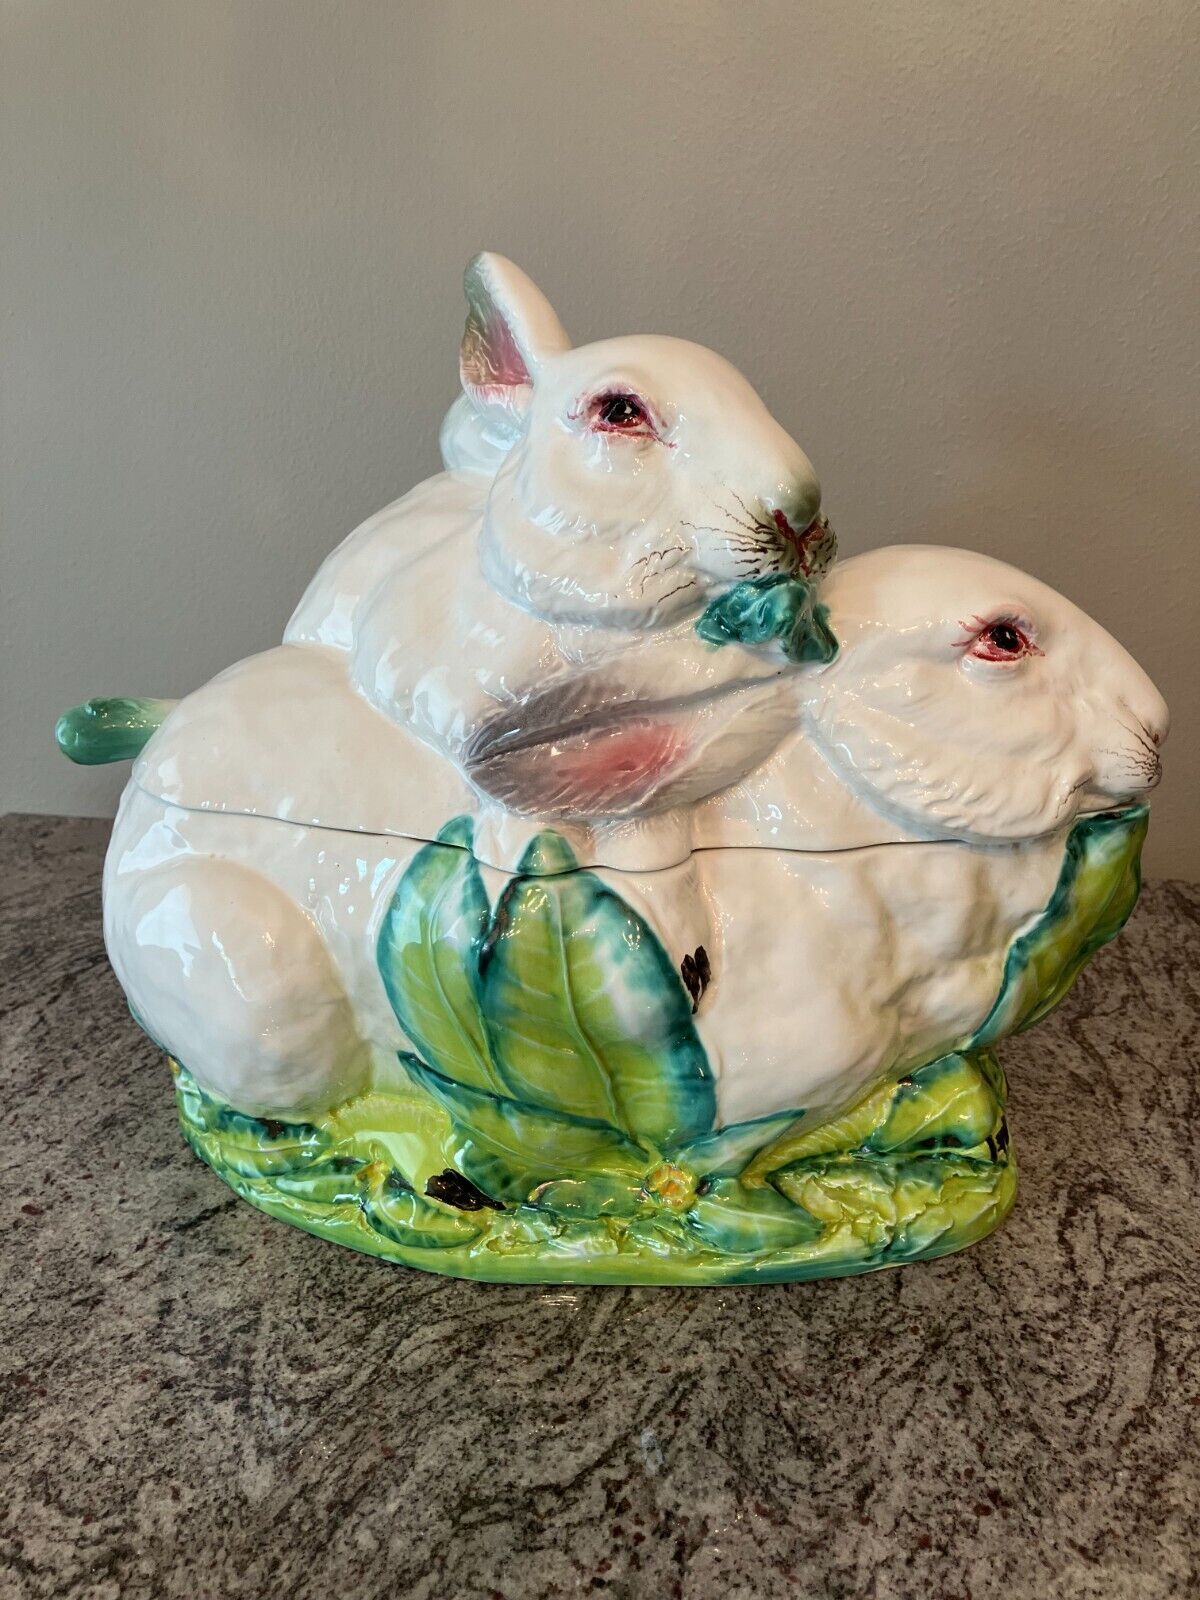 GUMPS. Elegant LARGE 3-piece RABBIT SOUP TUREEN,  made in Italy, DISCONTINUED